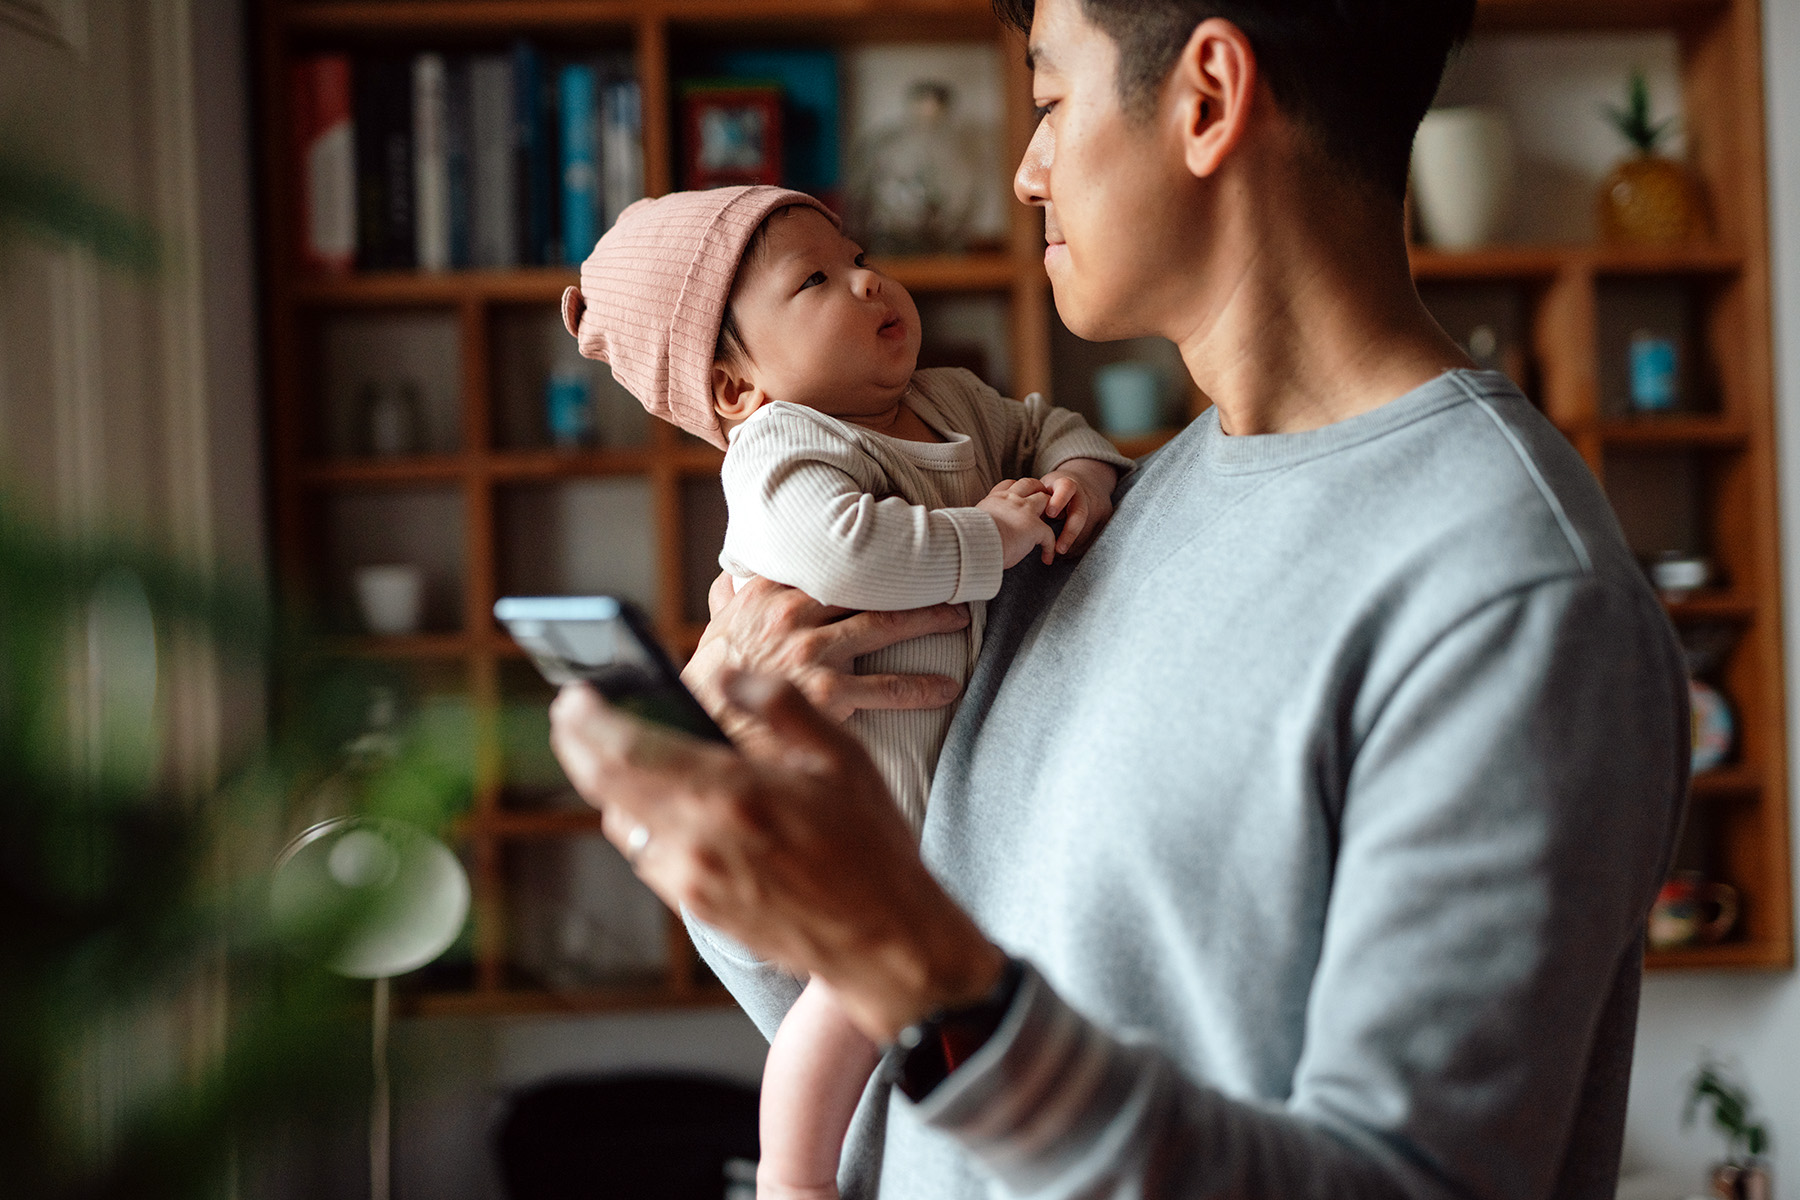 Father making faces at his baby who he is holding in his arms, while in one hand holding a smartphone.